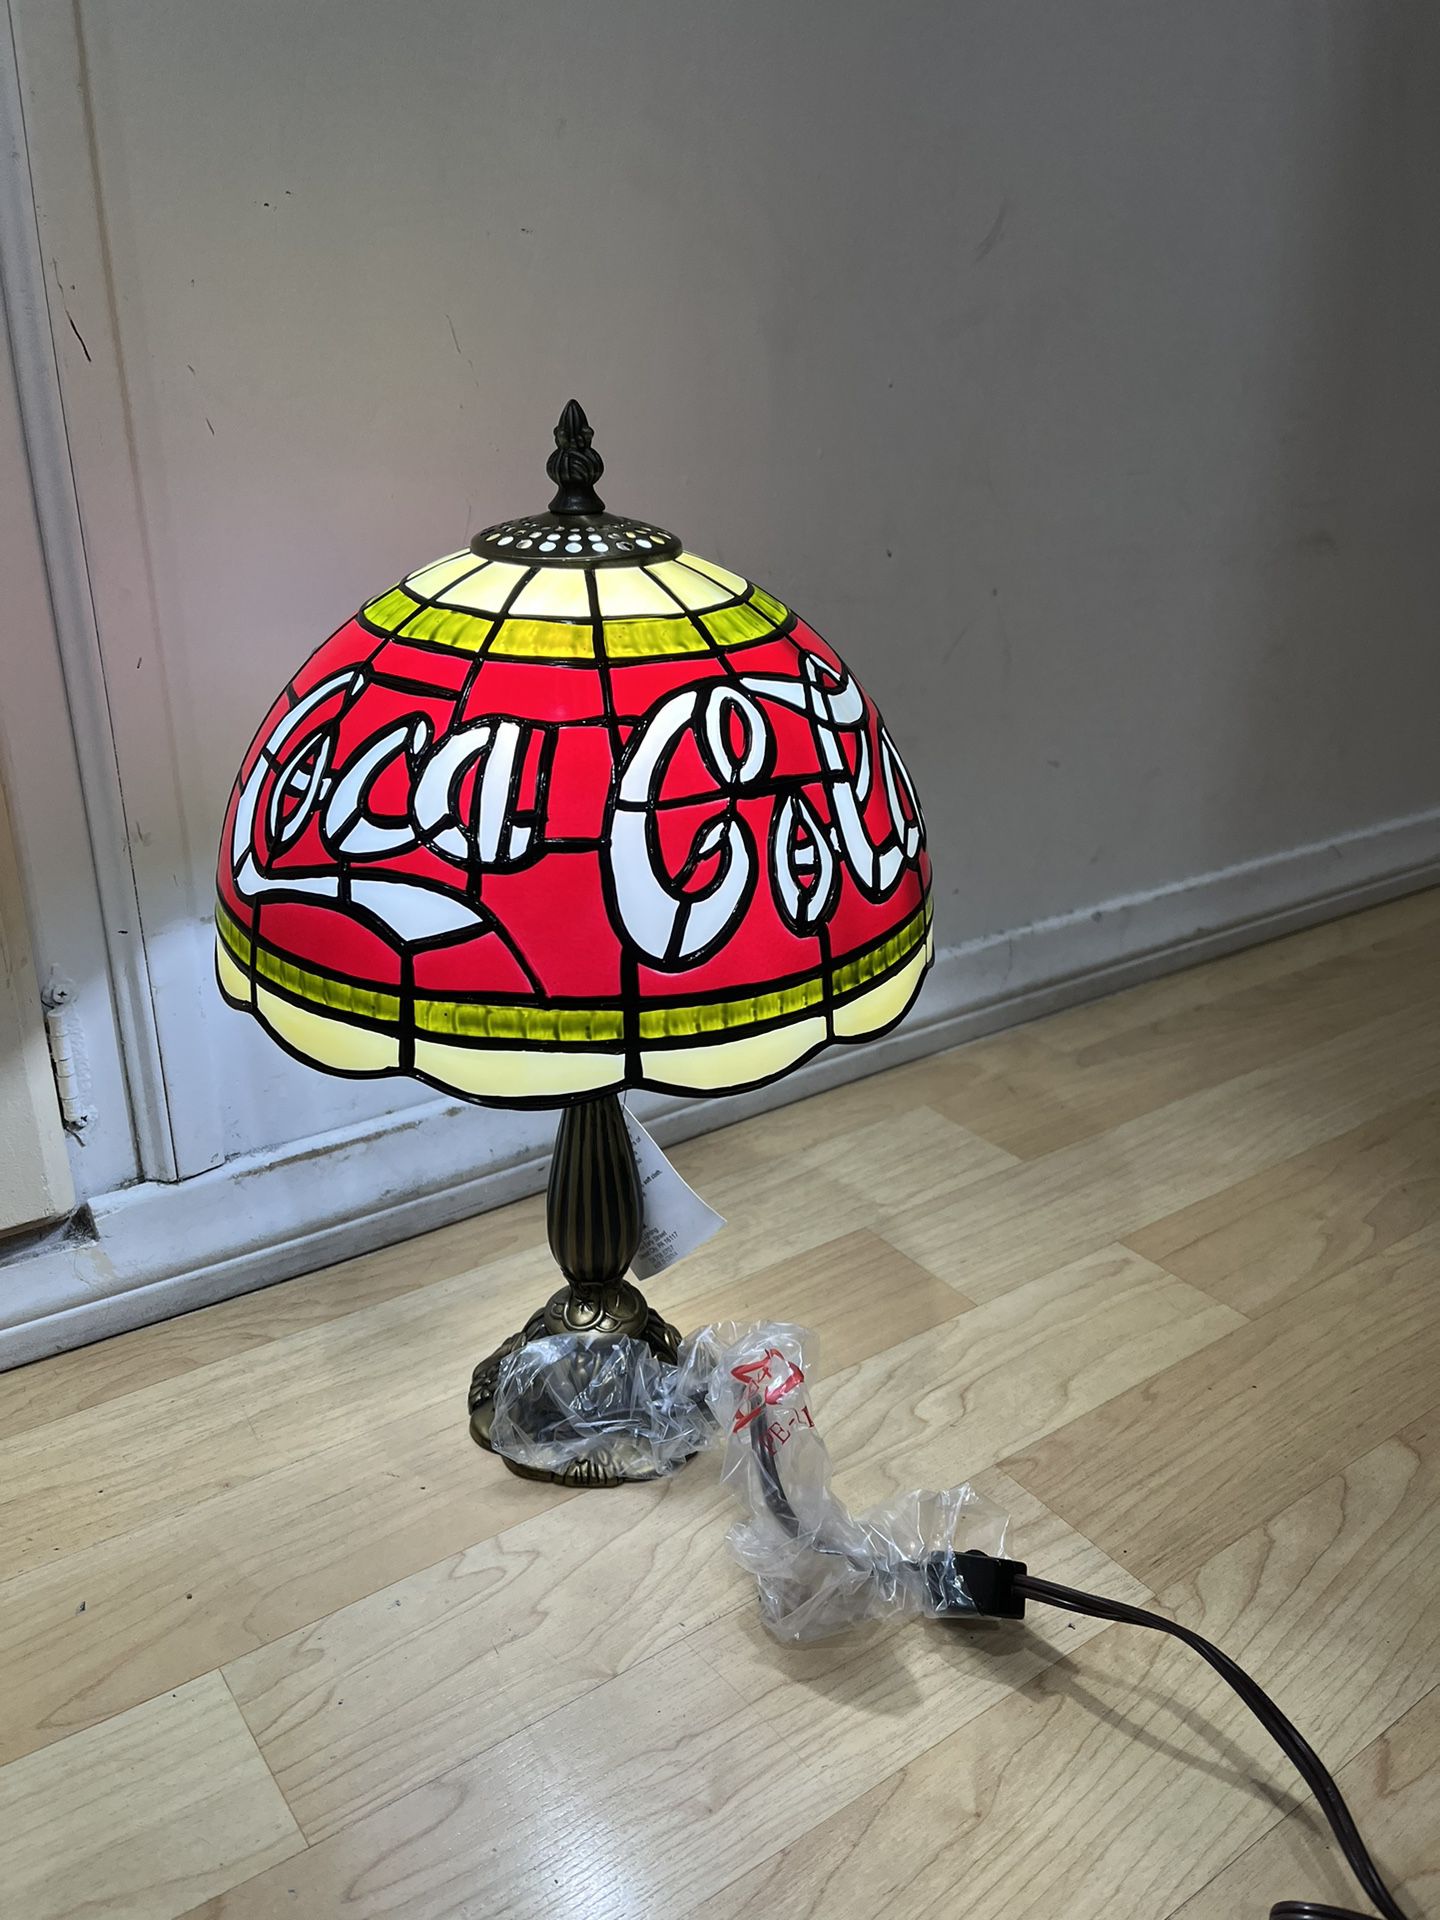 Vintage 15-1/2” Coca Cola Tiffany Style Plastic Stained Glass Shade 